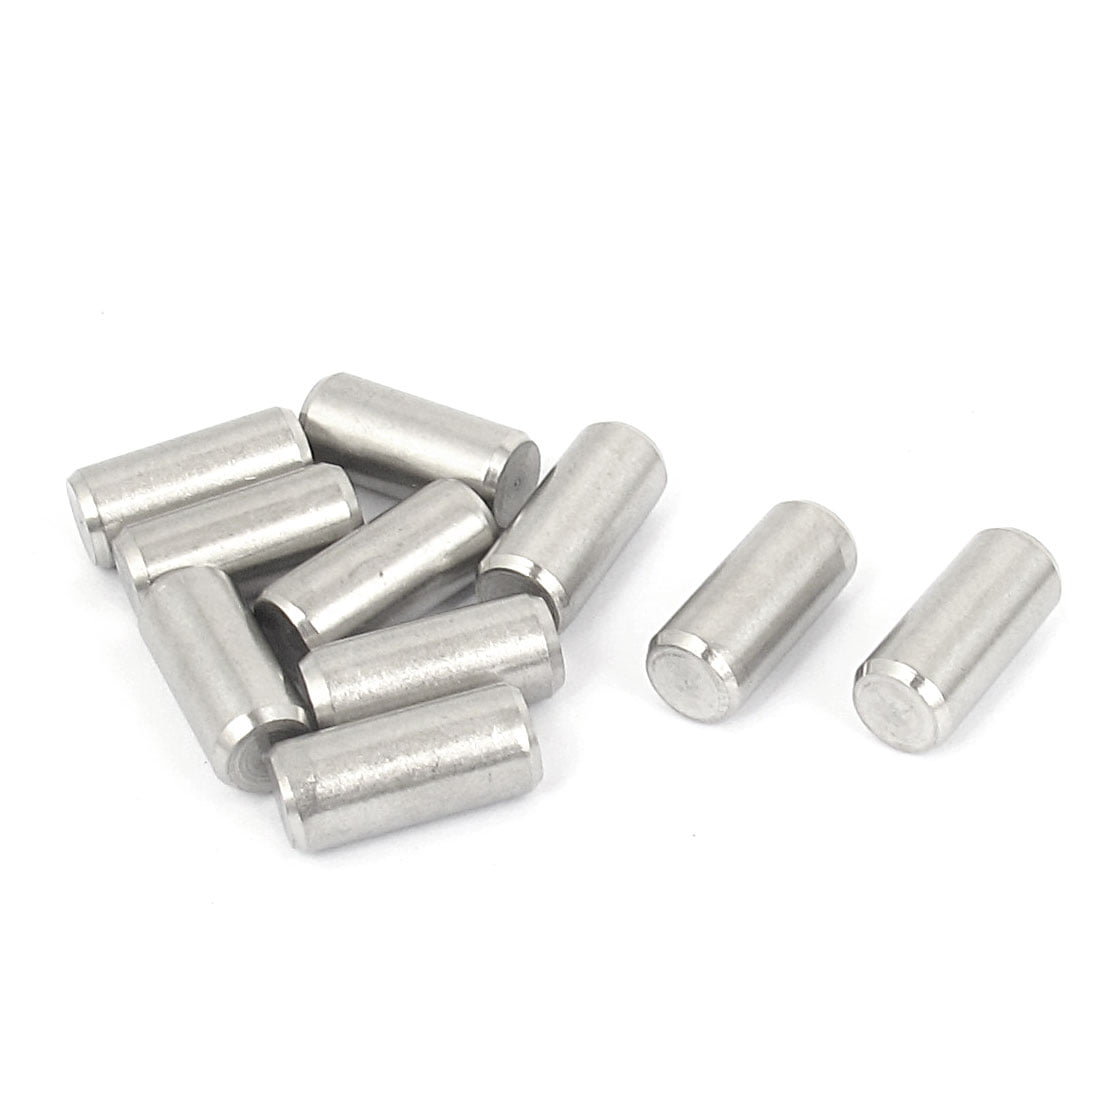 uxcell 10Pcs 6mm x 18mm Dowel Pin 304 Stainless Steel Shelf Support Pin Fasten Elements Silver Tone 